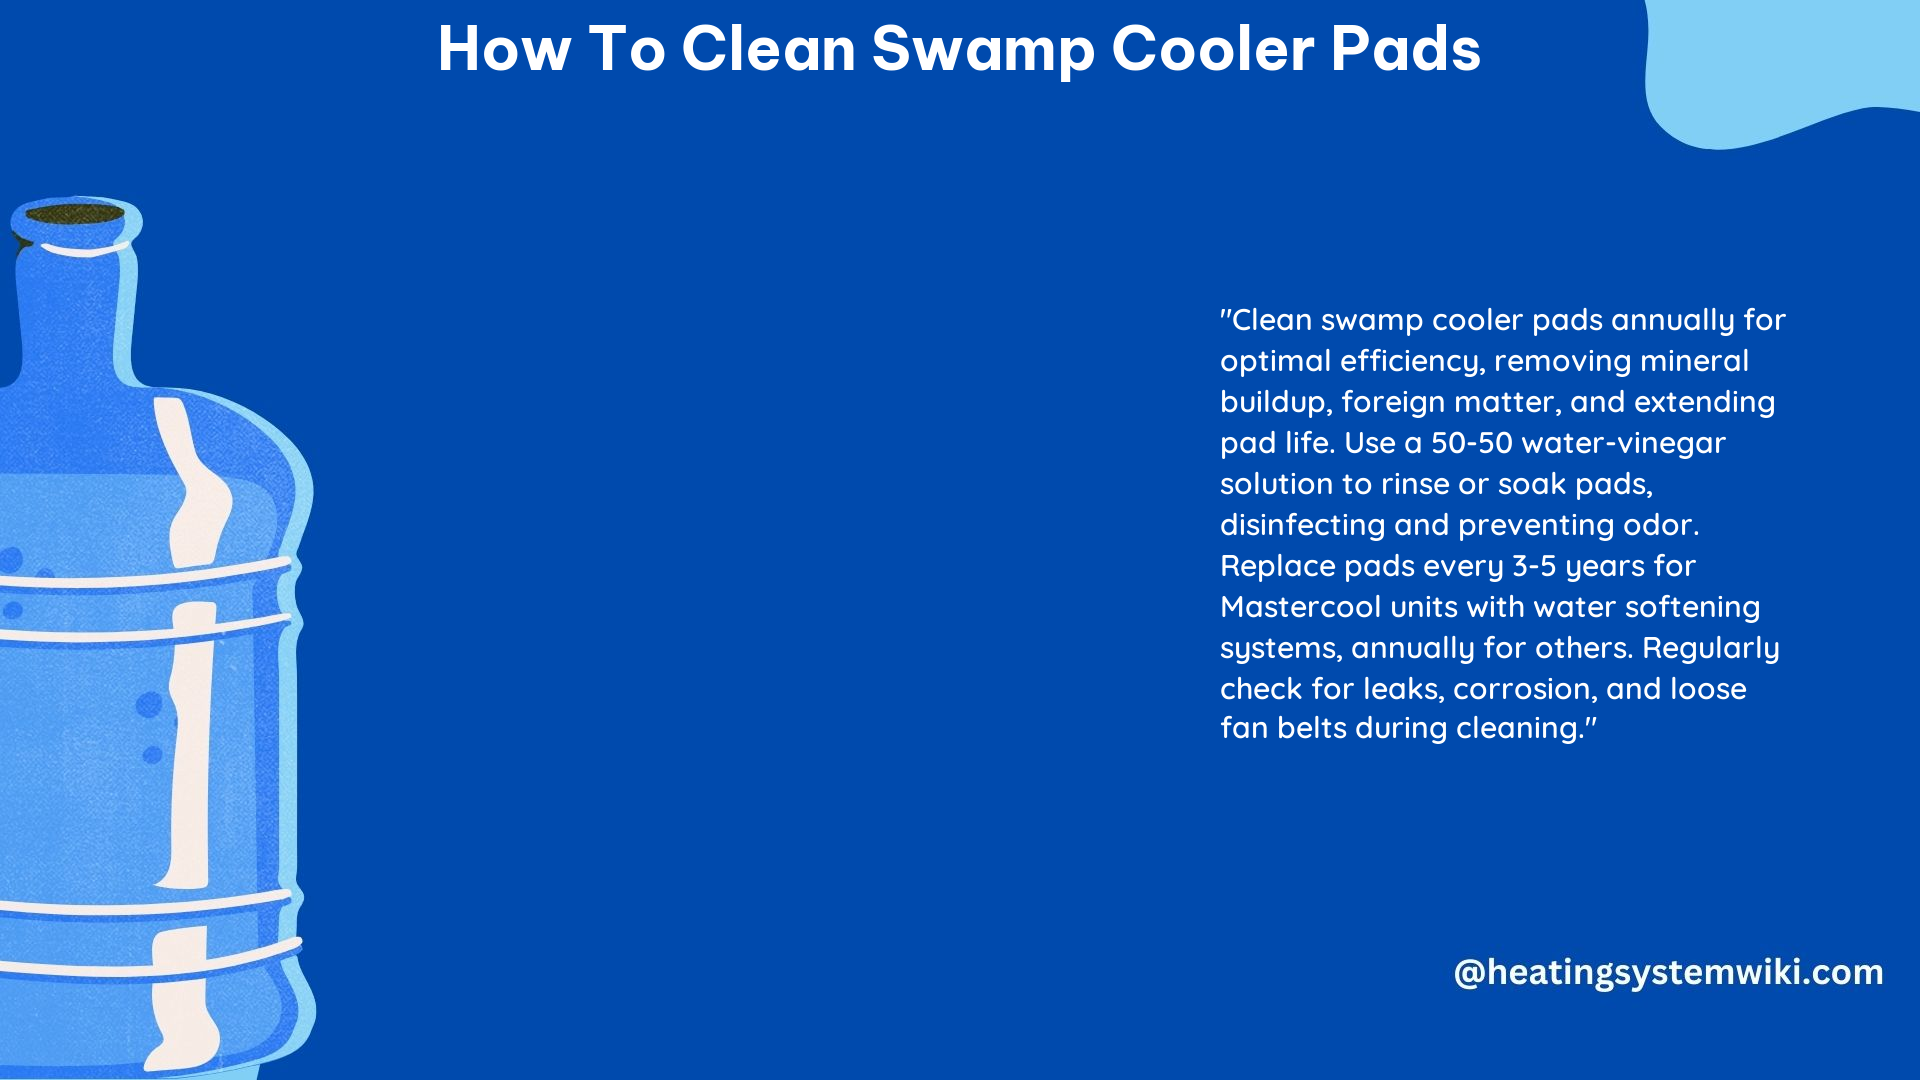 How to Clean Swamp Cooler Pads